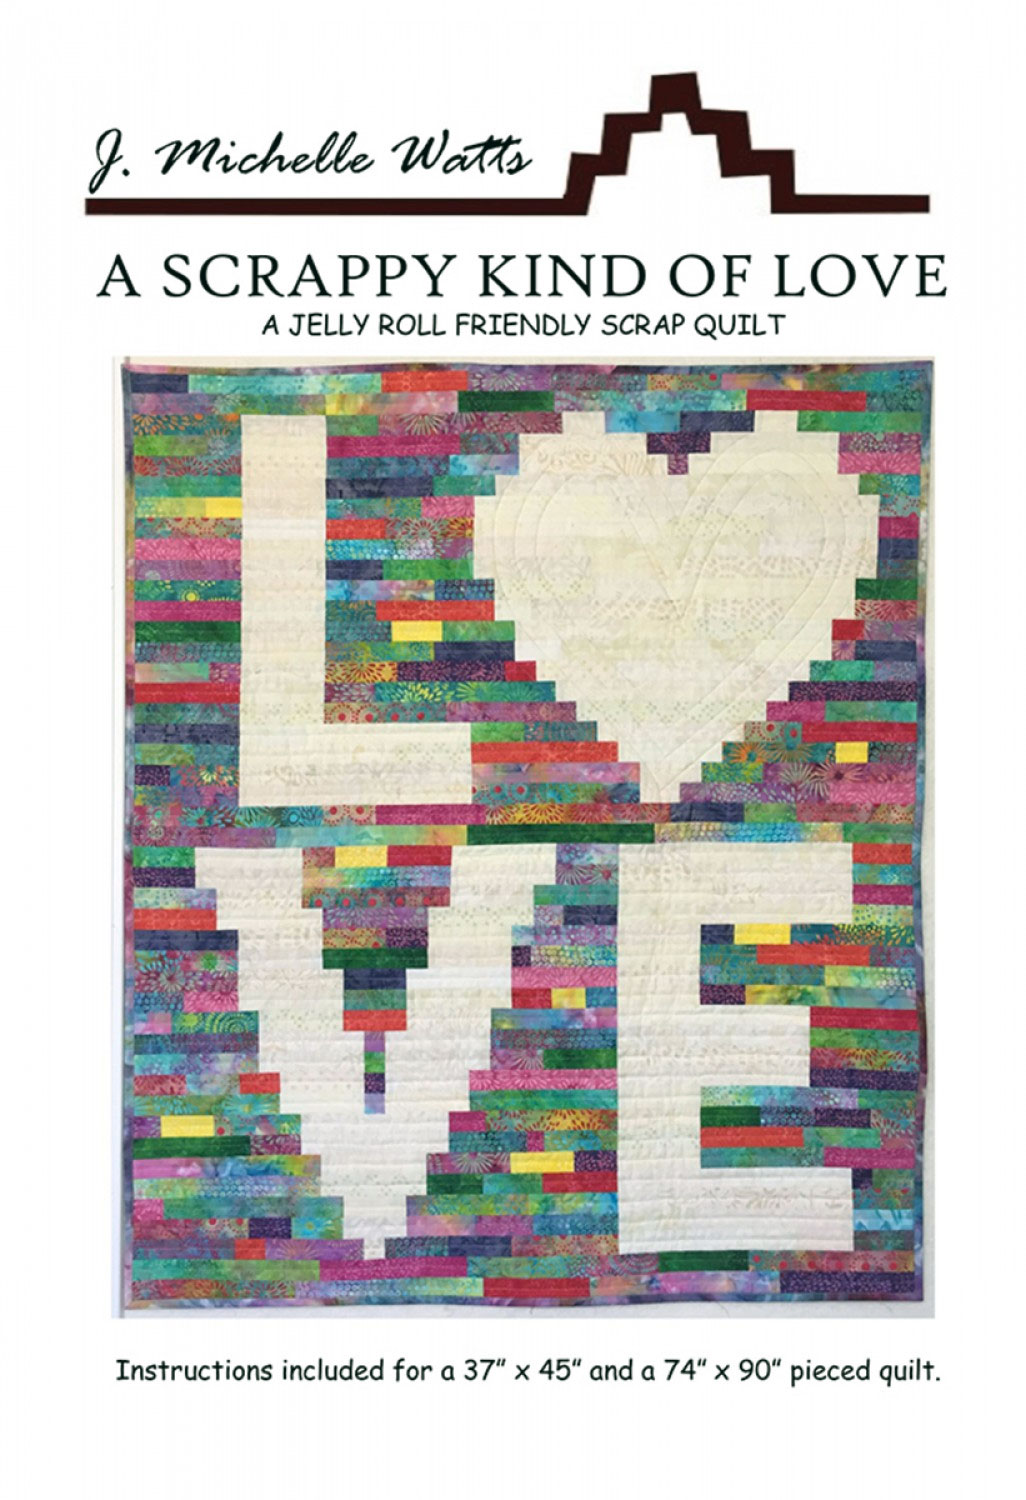 A-Scrappy-Kind-of-Love-quilt-sewing-pattern-J-Michelle-Watts-Designs-front